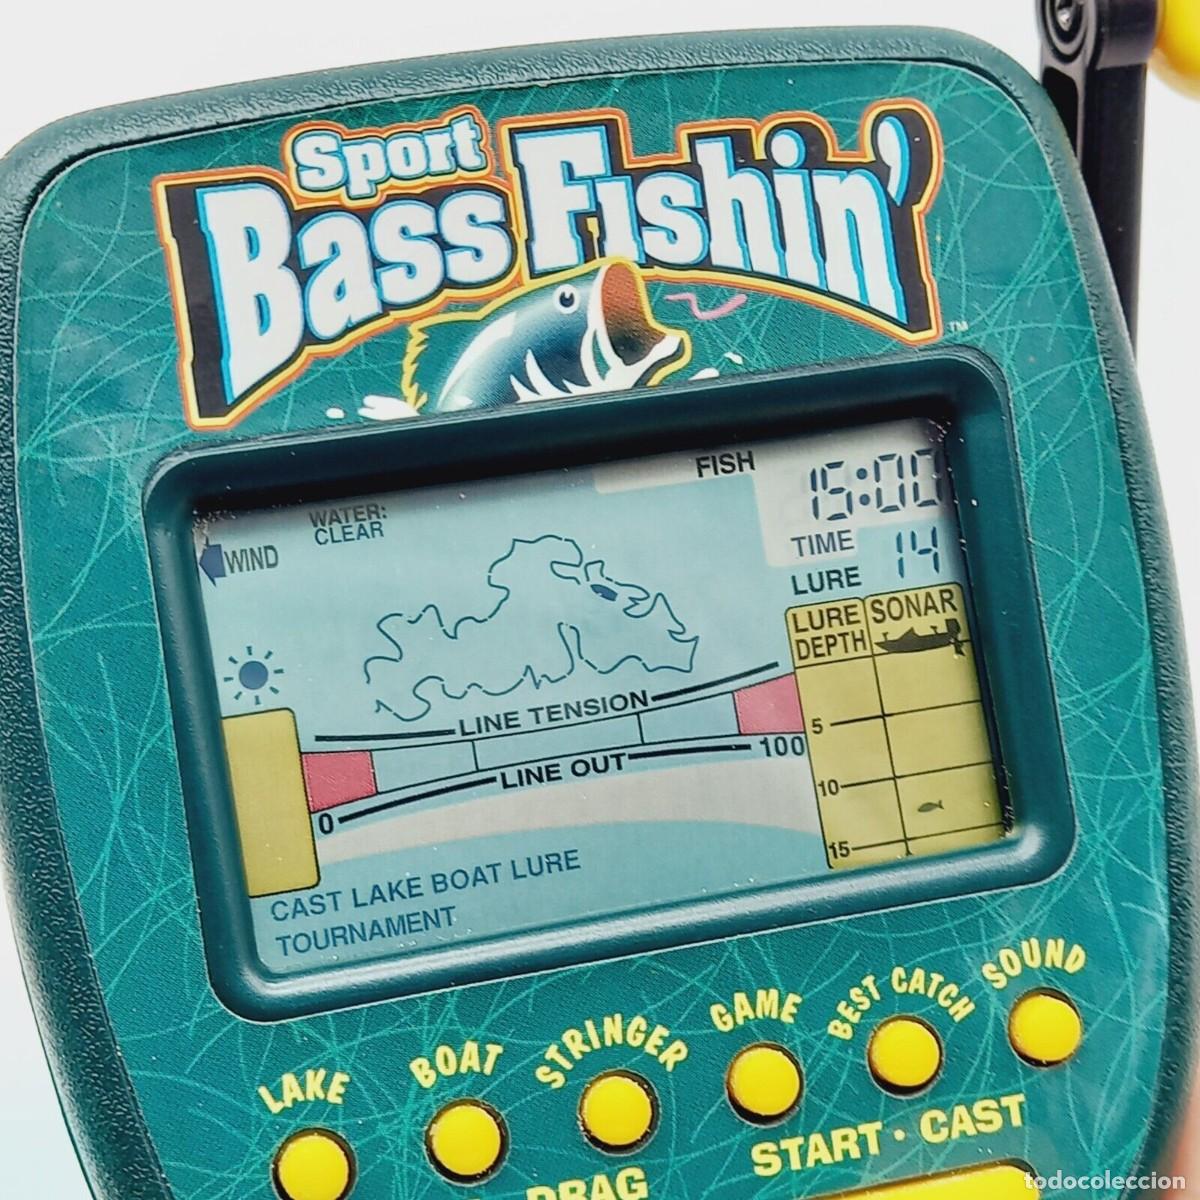 consola tipo game & watch lcd sport bass fishin - Buy Other video